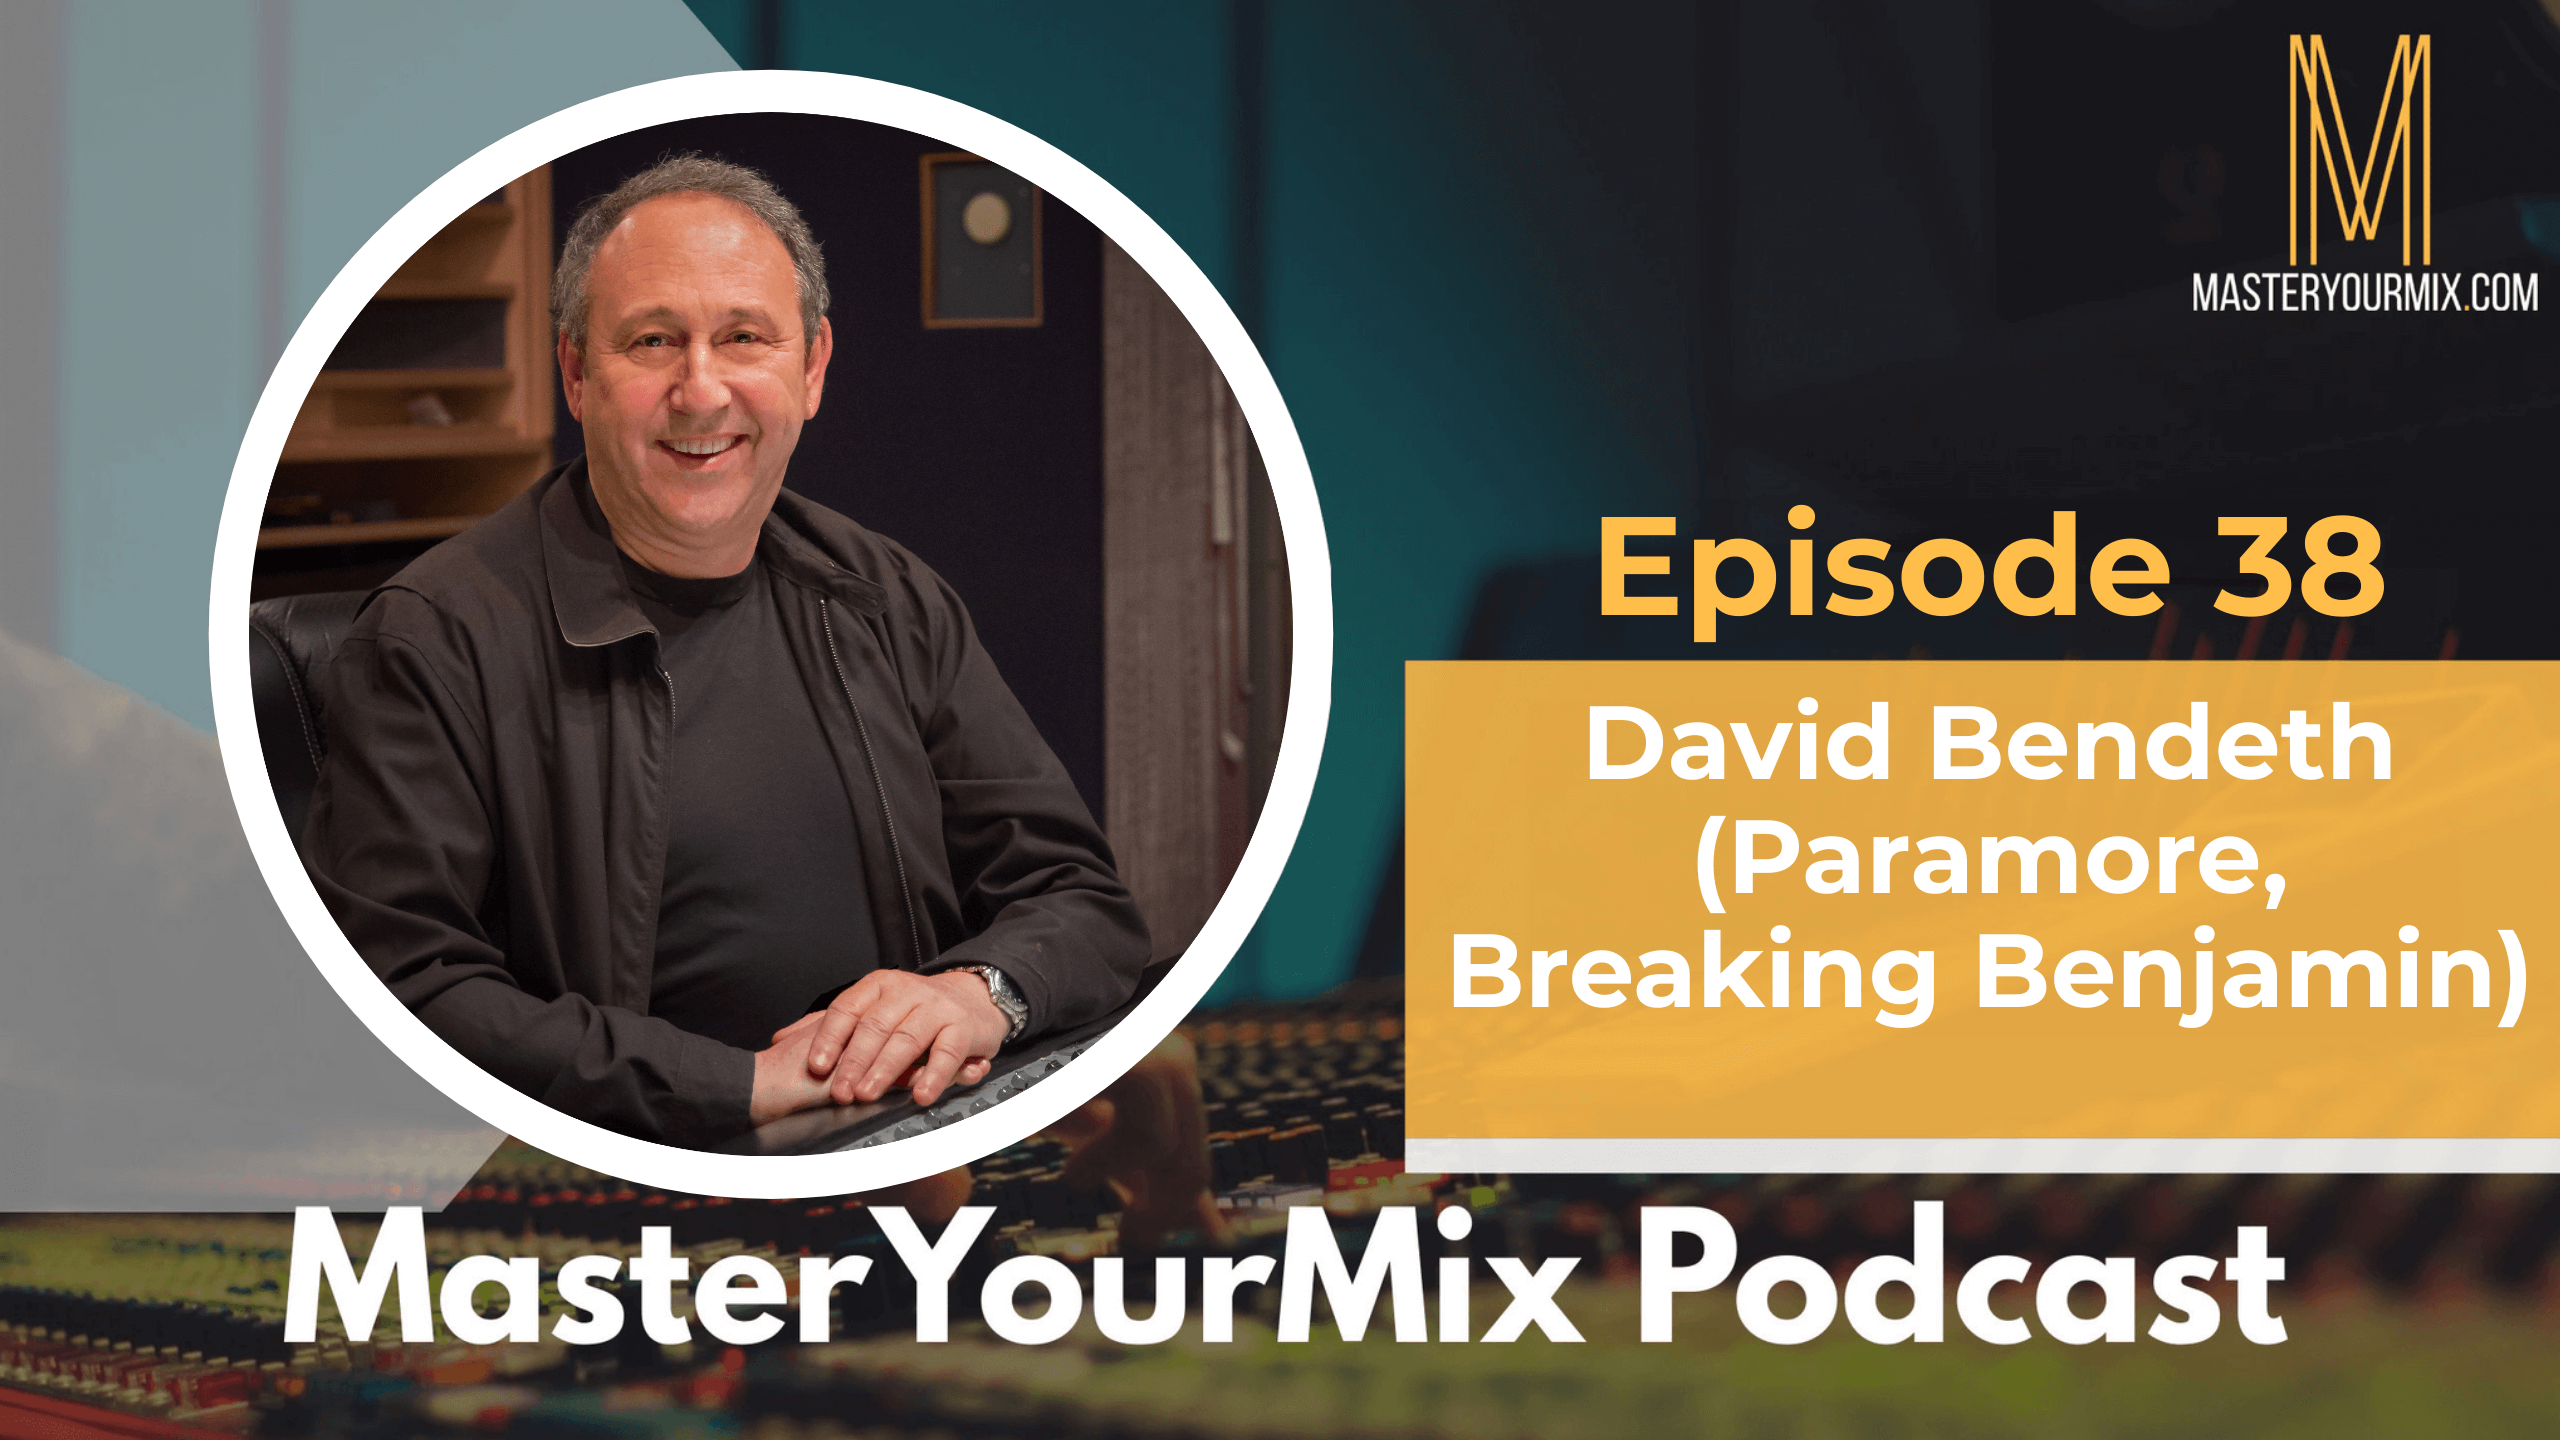 master your mix podcast, ep 38 david bendeth